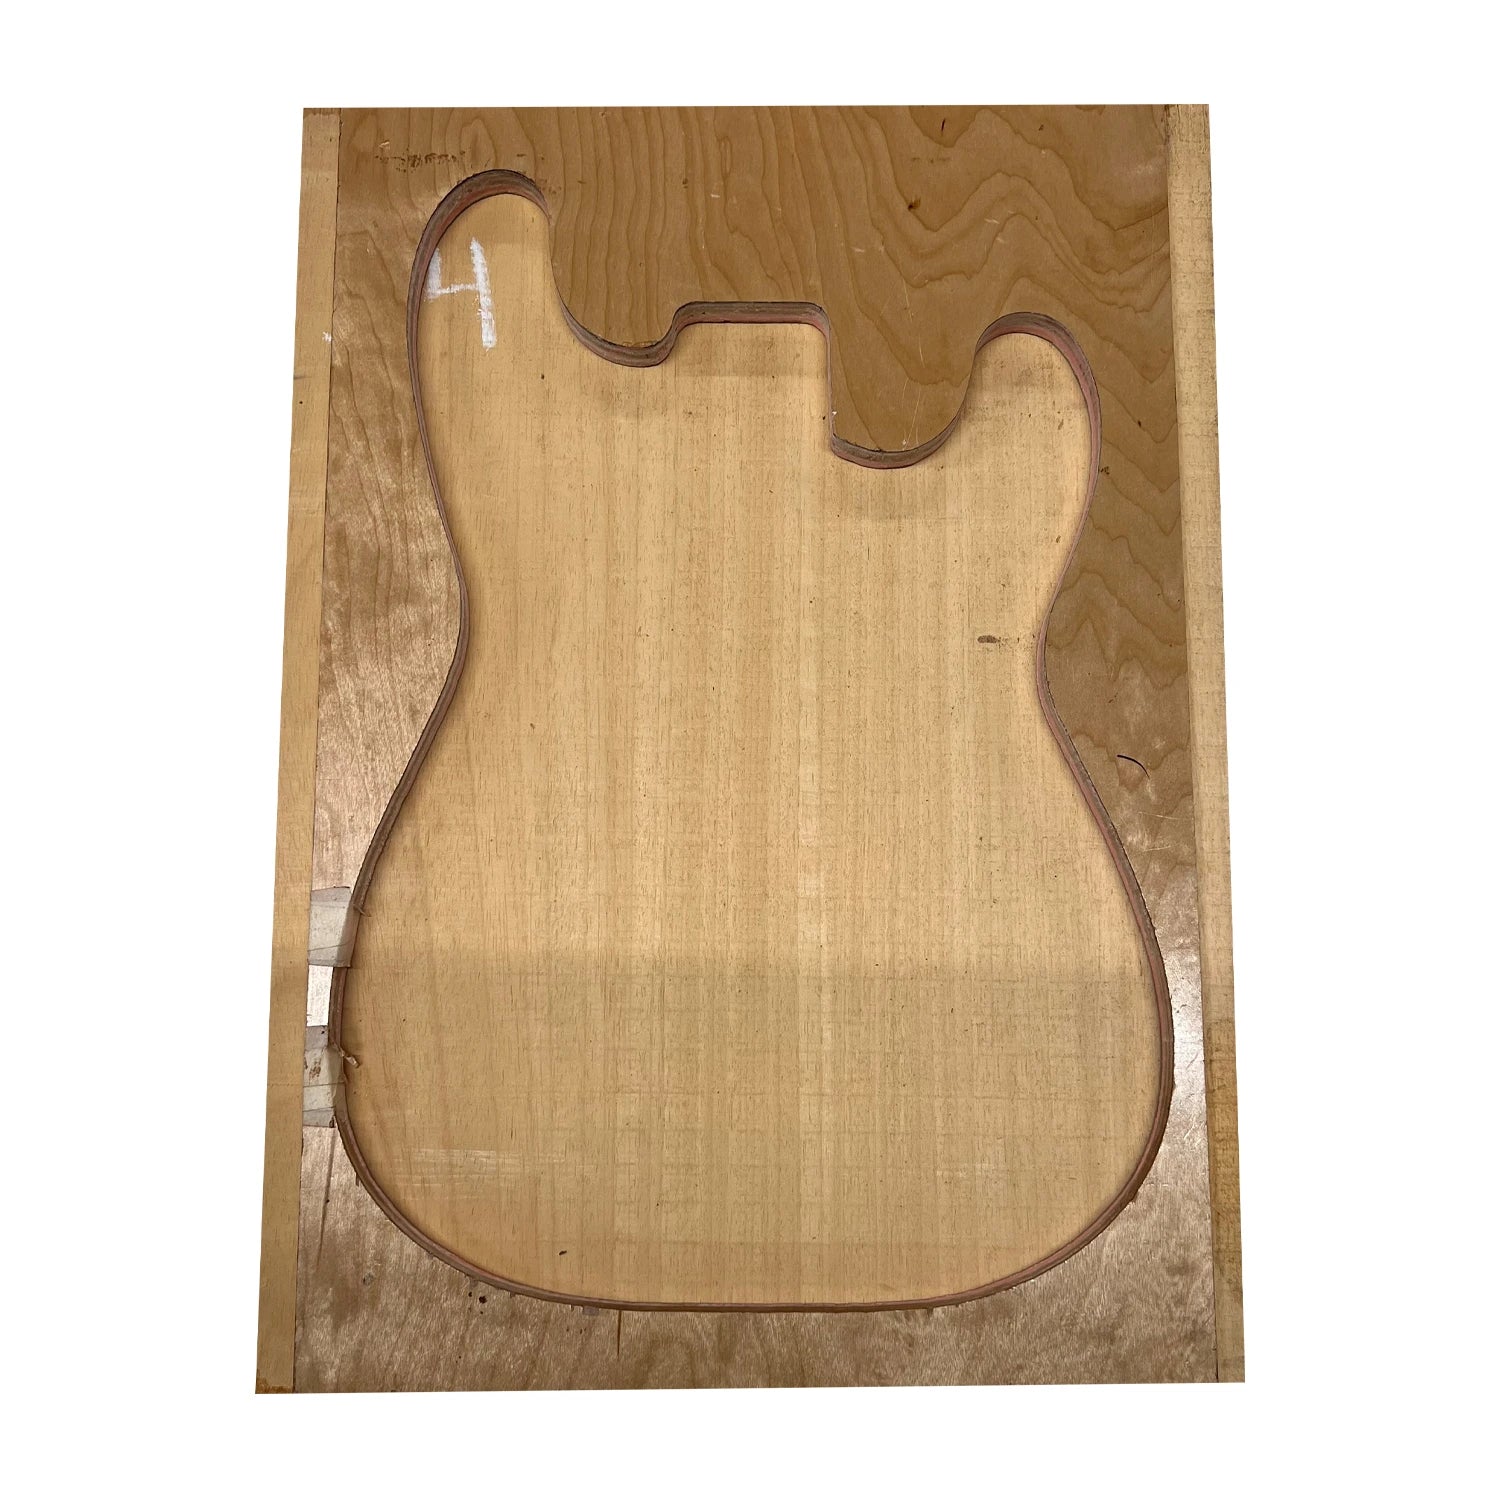 African Swamp Ash/Ayous Electric/Bass Guitar Single Piece Wood Body Blanks 21.5″ x 15-3/4″ x 2-1/4″ 